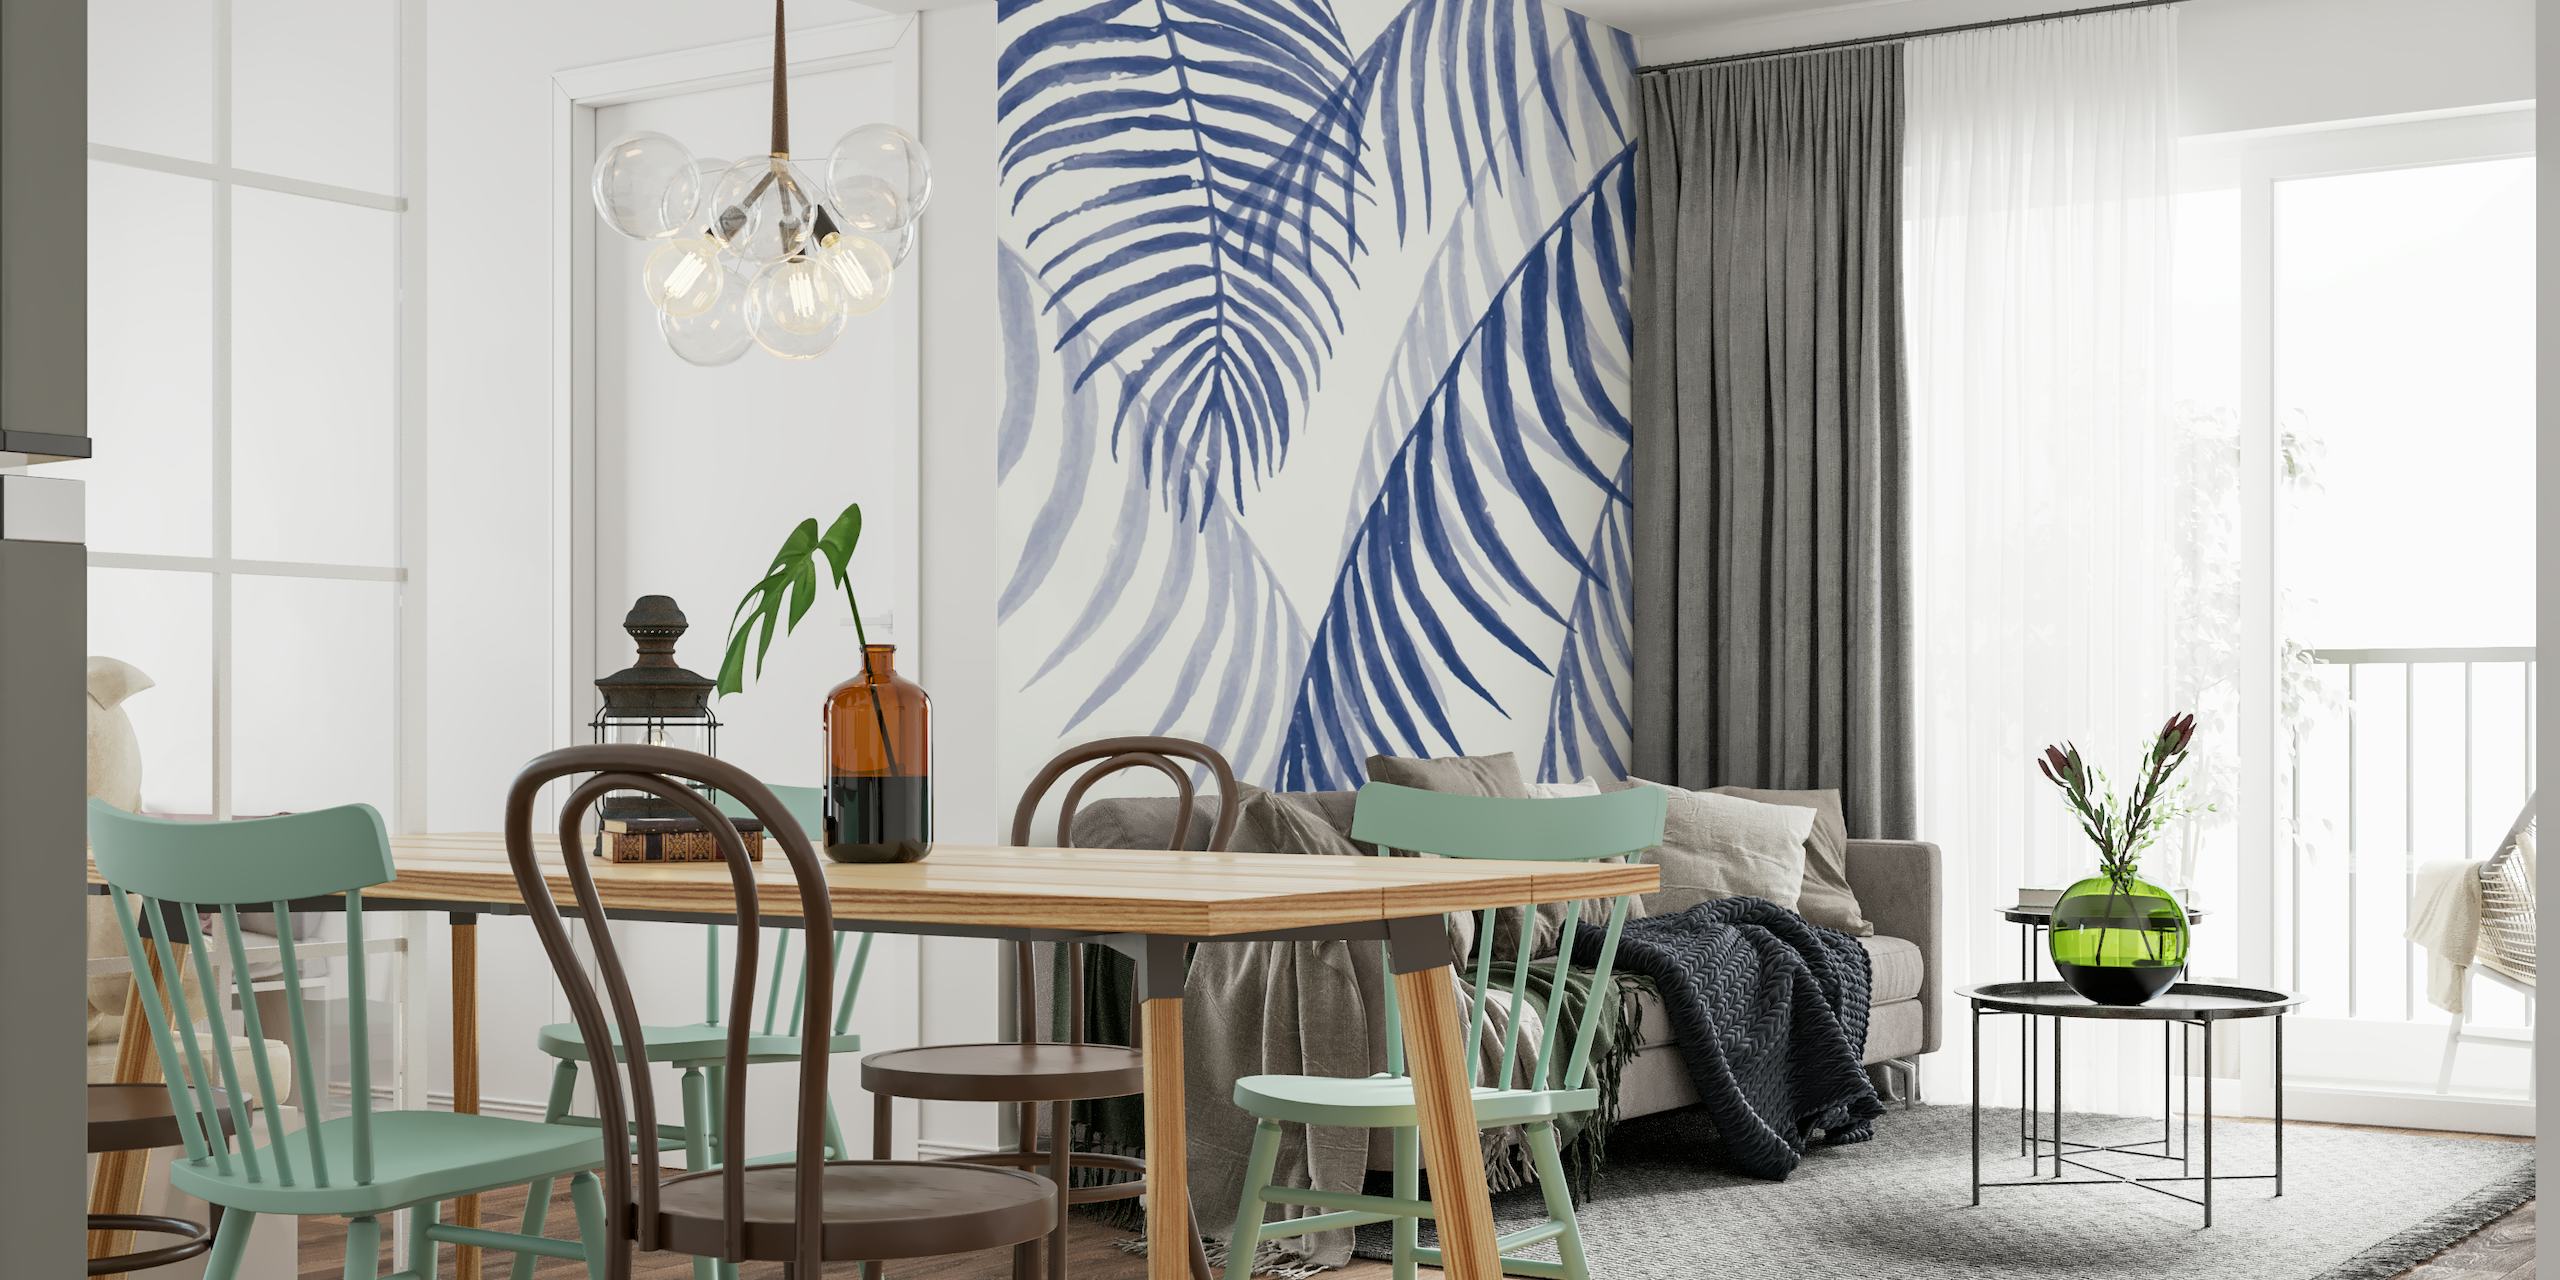 Blue palm leaves wall mural with tropical fronds on an off-white background.